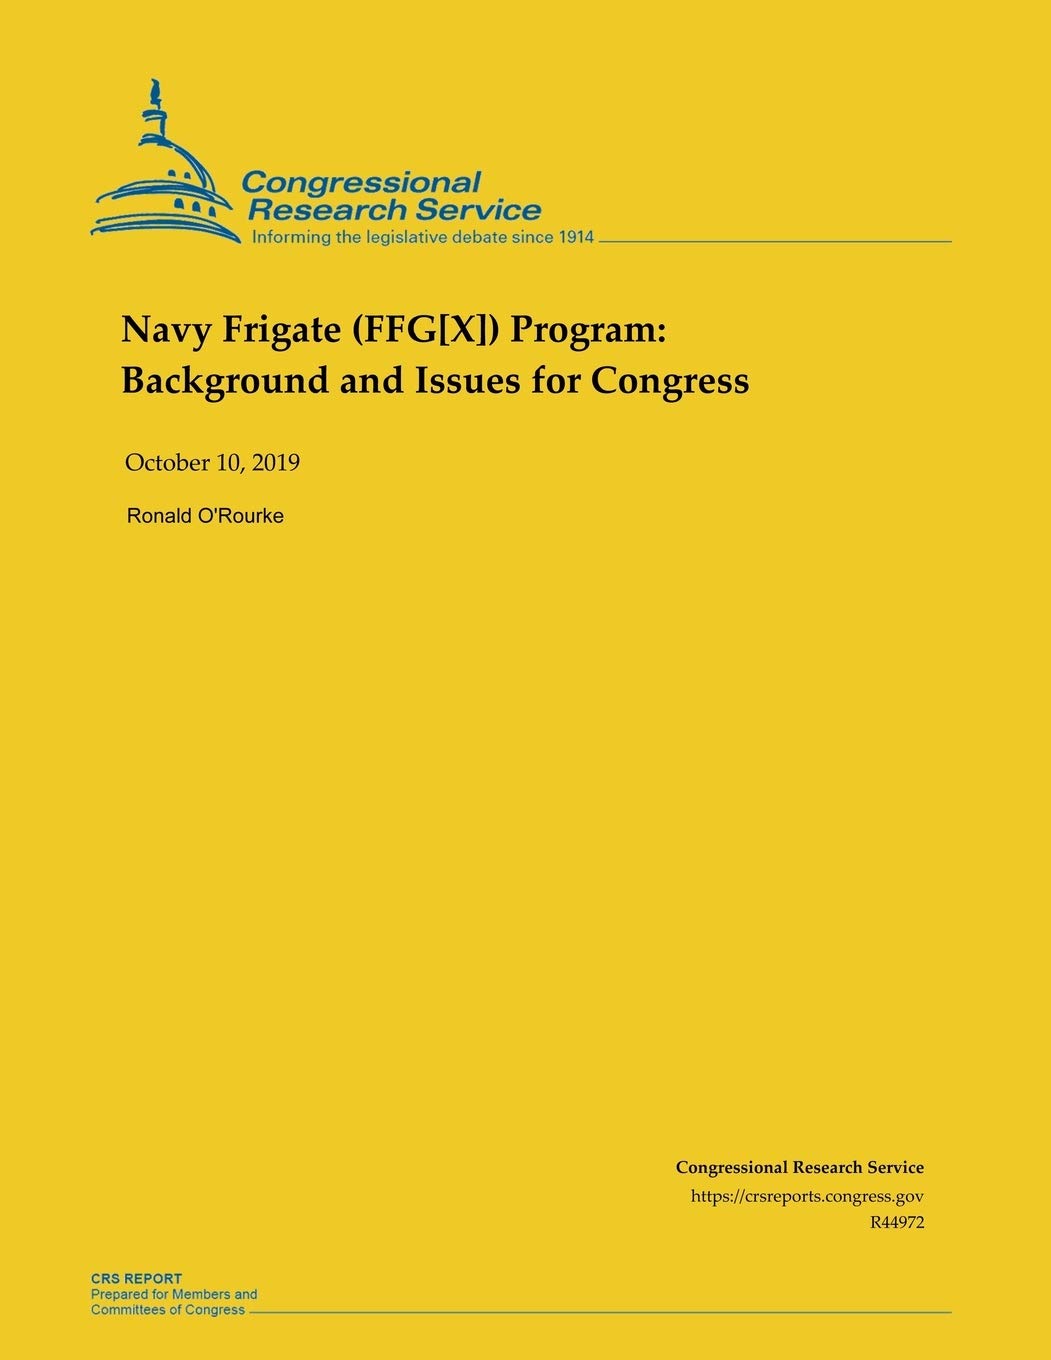 Navy Frigate Ffg X Program Background And Issues For Congress